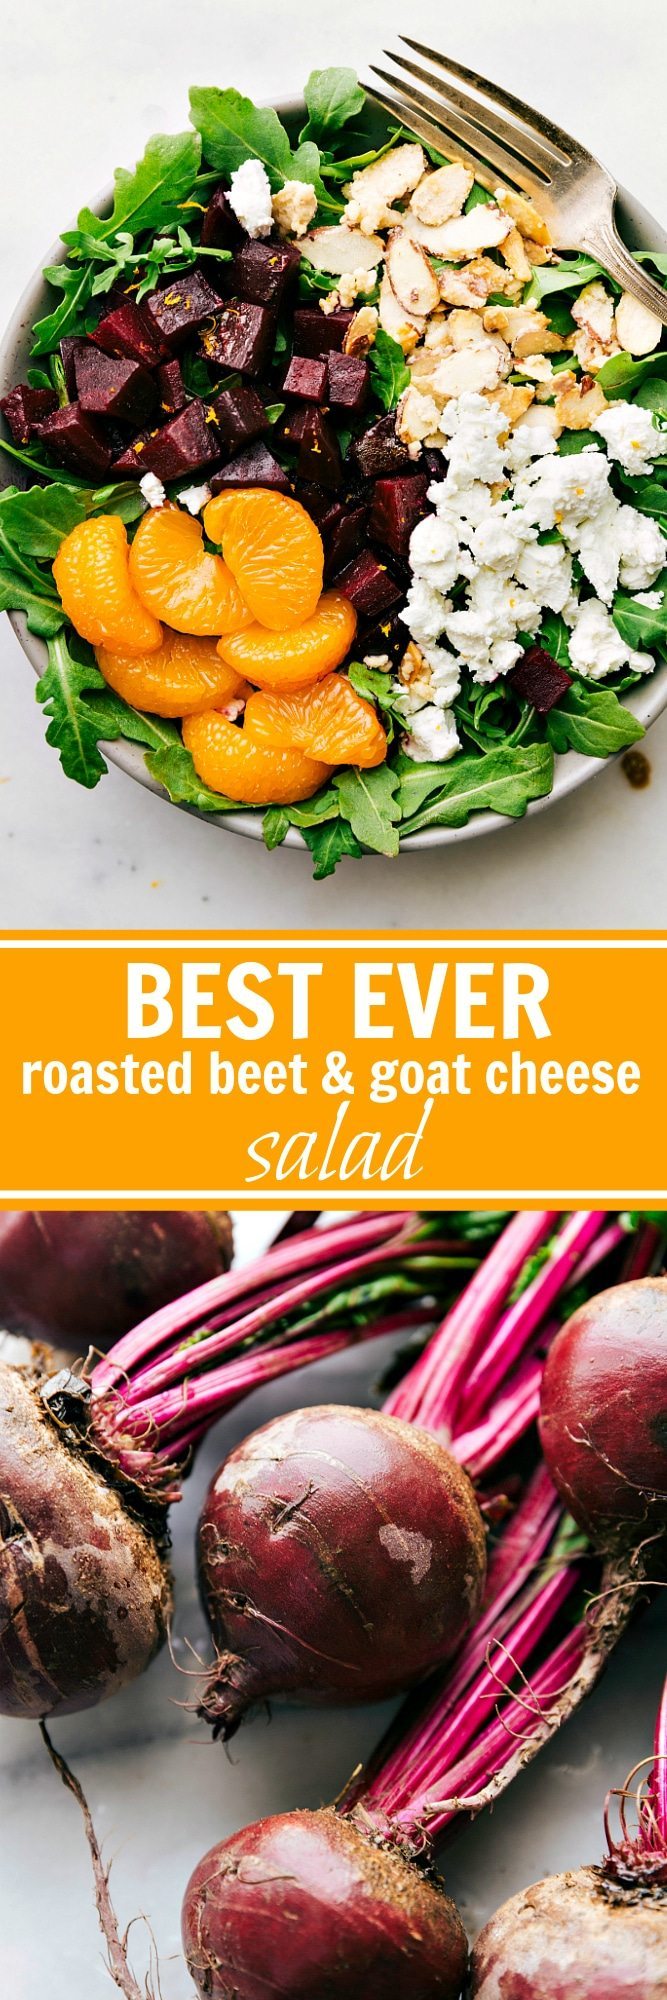 The BEST roasted beets ever!! Salt roasted beets coated in balsamic vinaigrette and tossed with arugula, easy (2-ingredients) candied almonds, mandarin oranges, and goat cheese. I Delicious roasted beet and goat cheese salad! via chelseasmessyapron.com